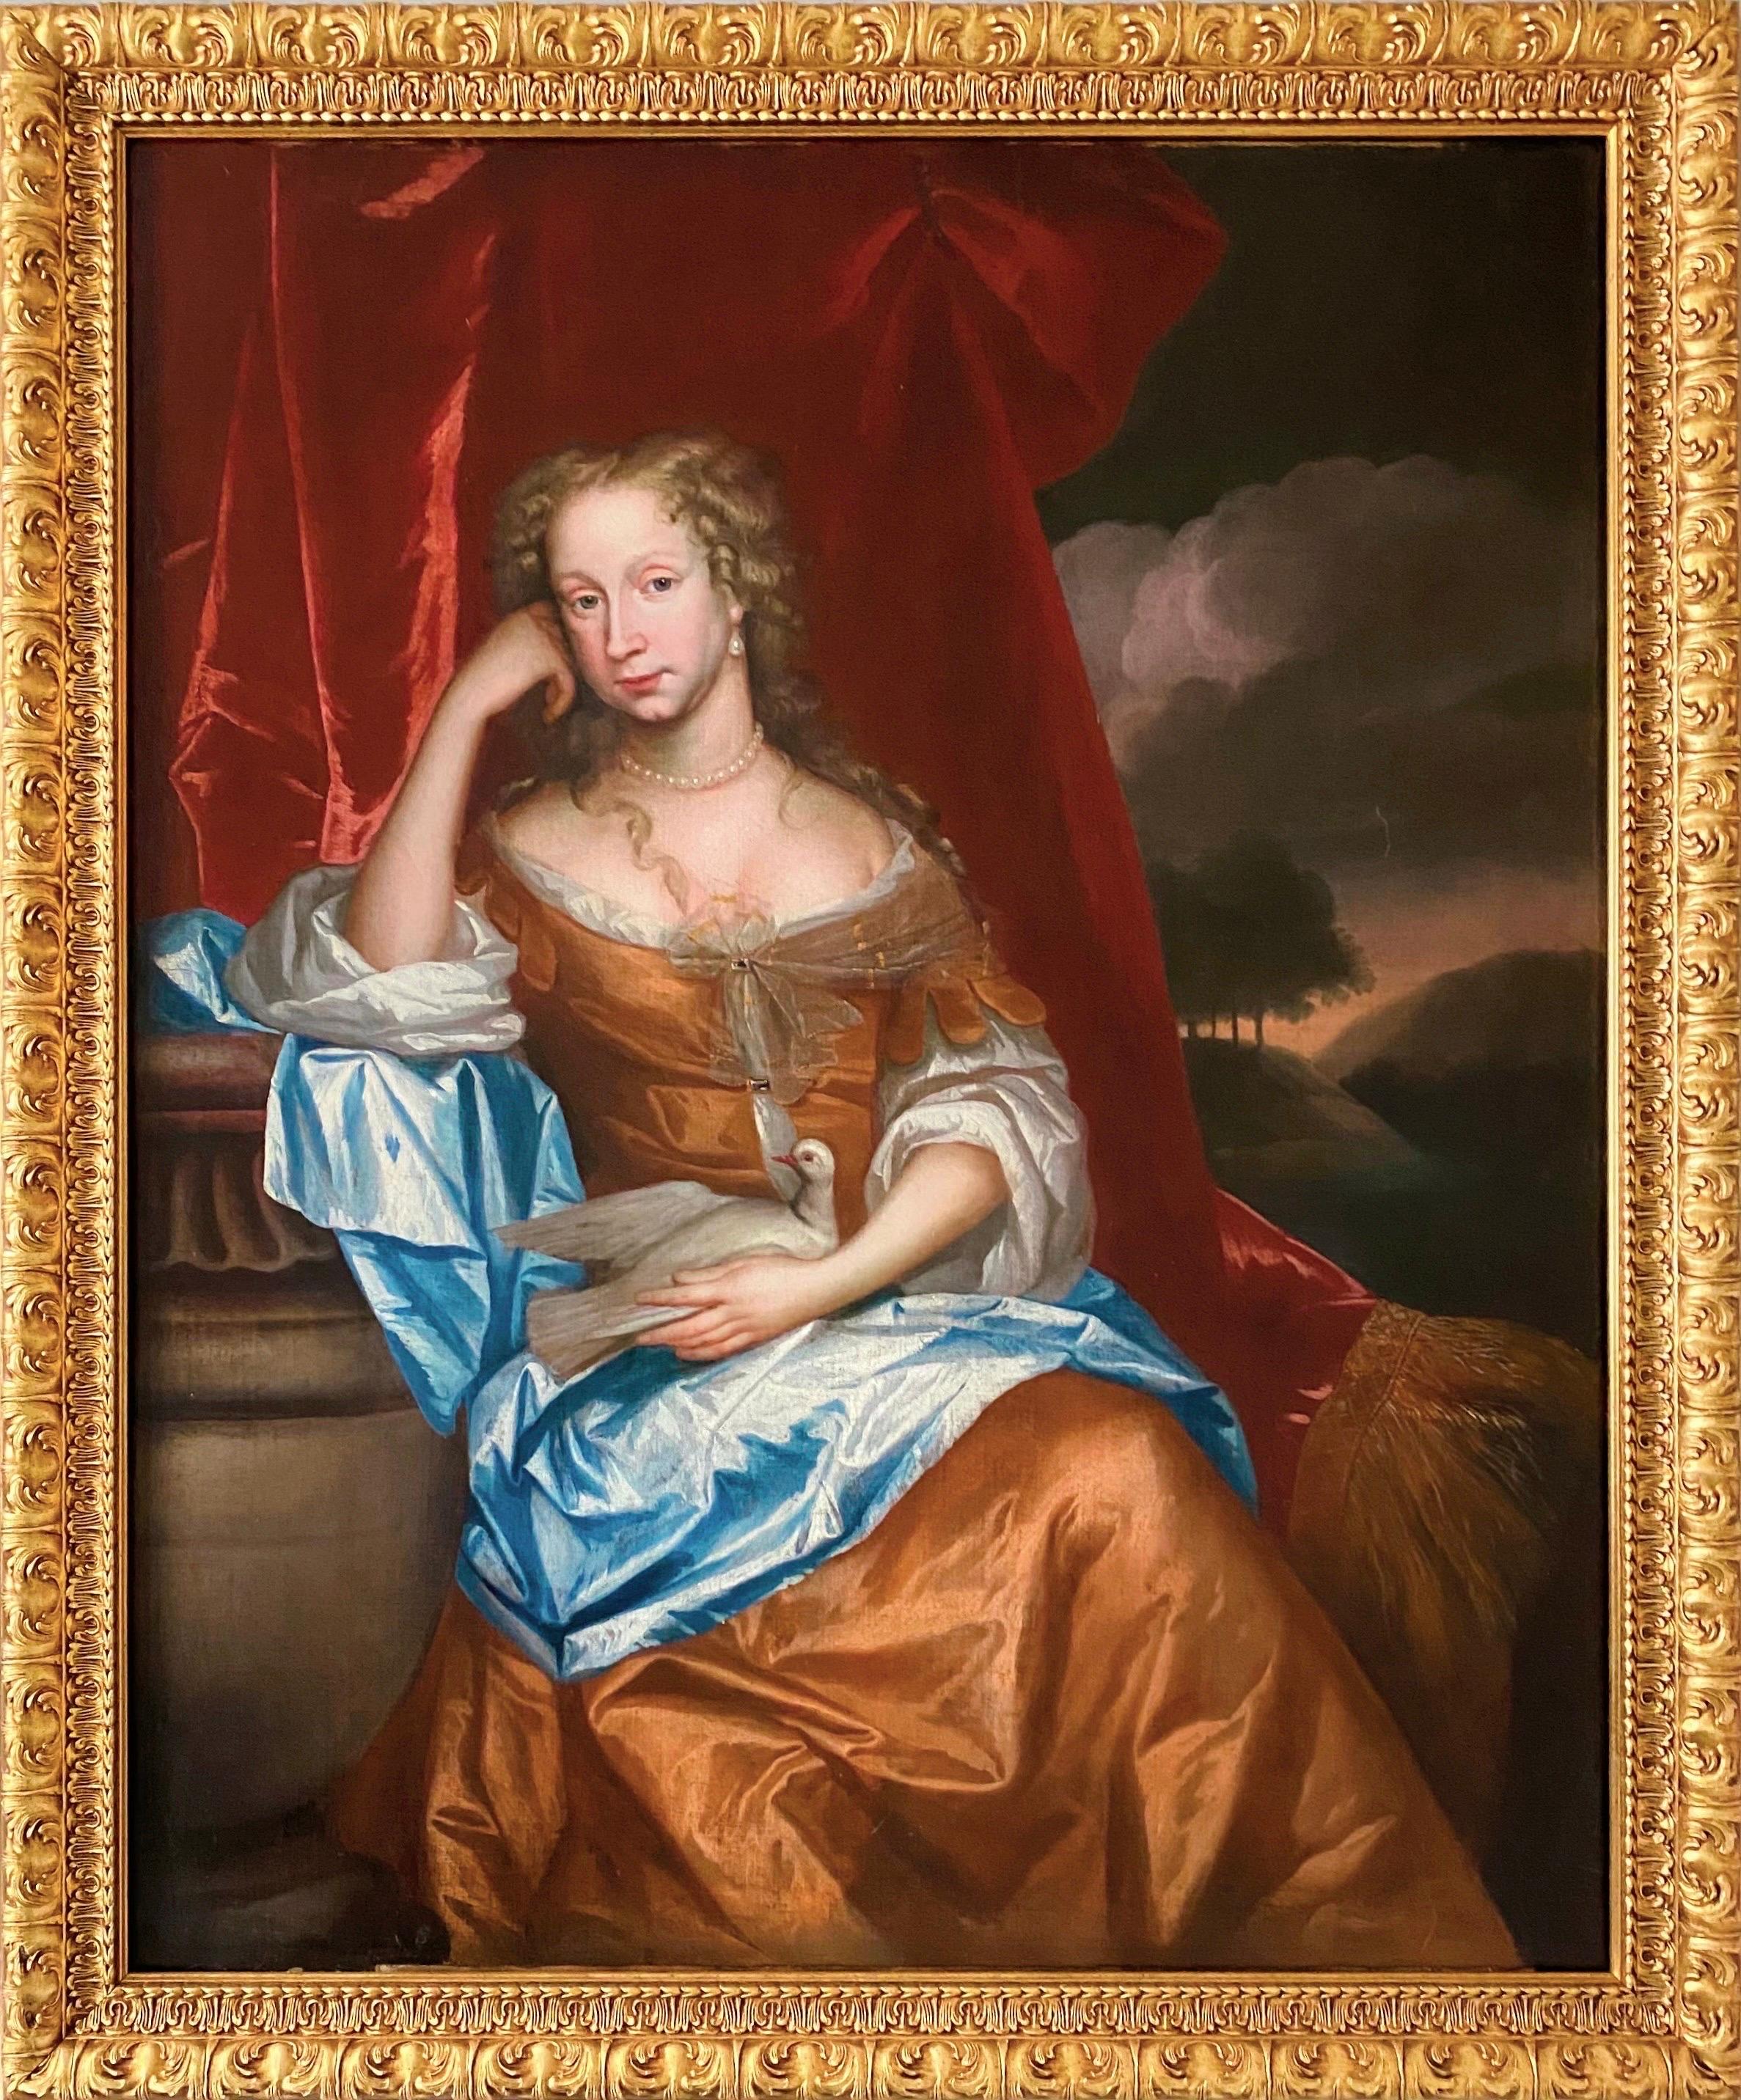 18th century British old master portrait of a noble lady - Royal - love 